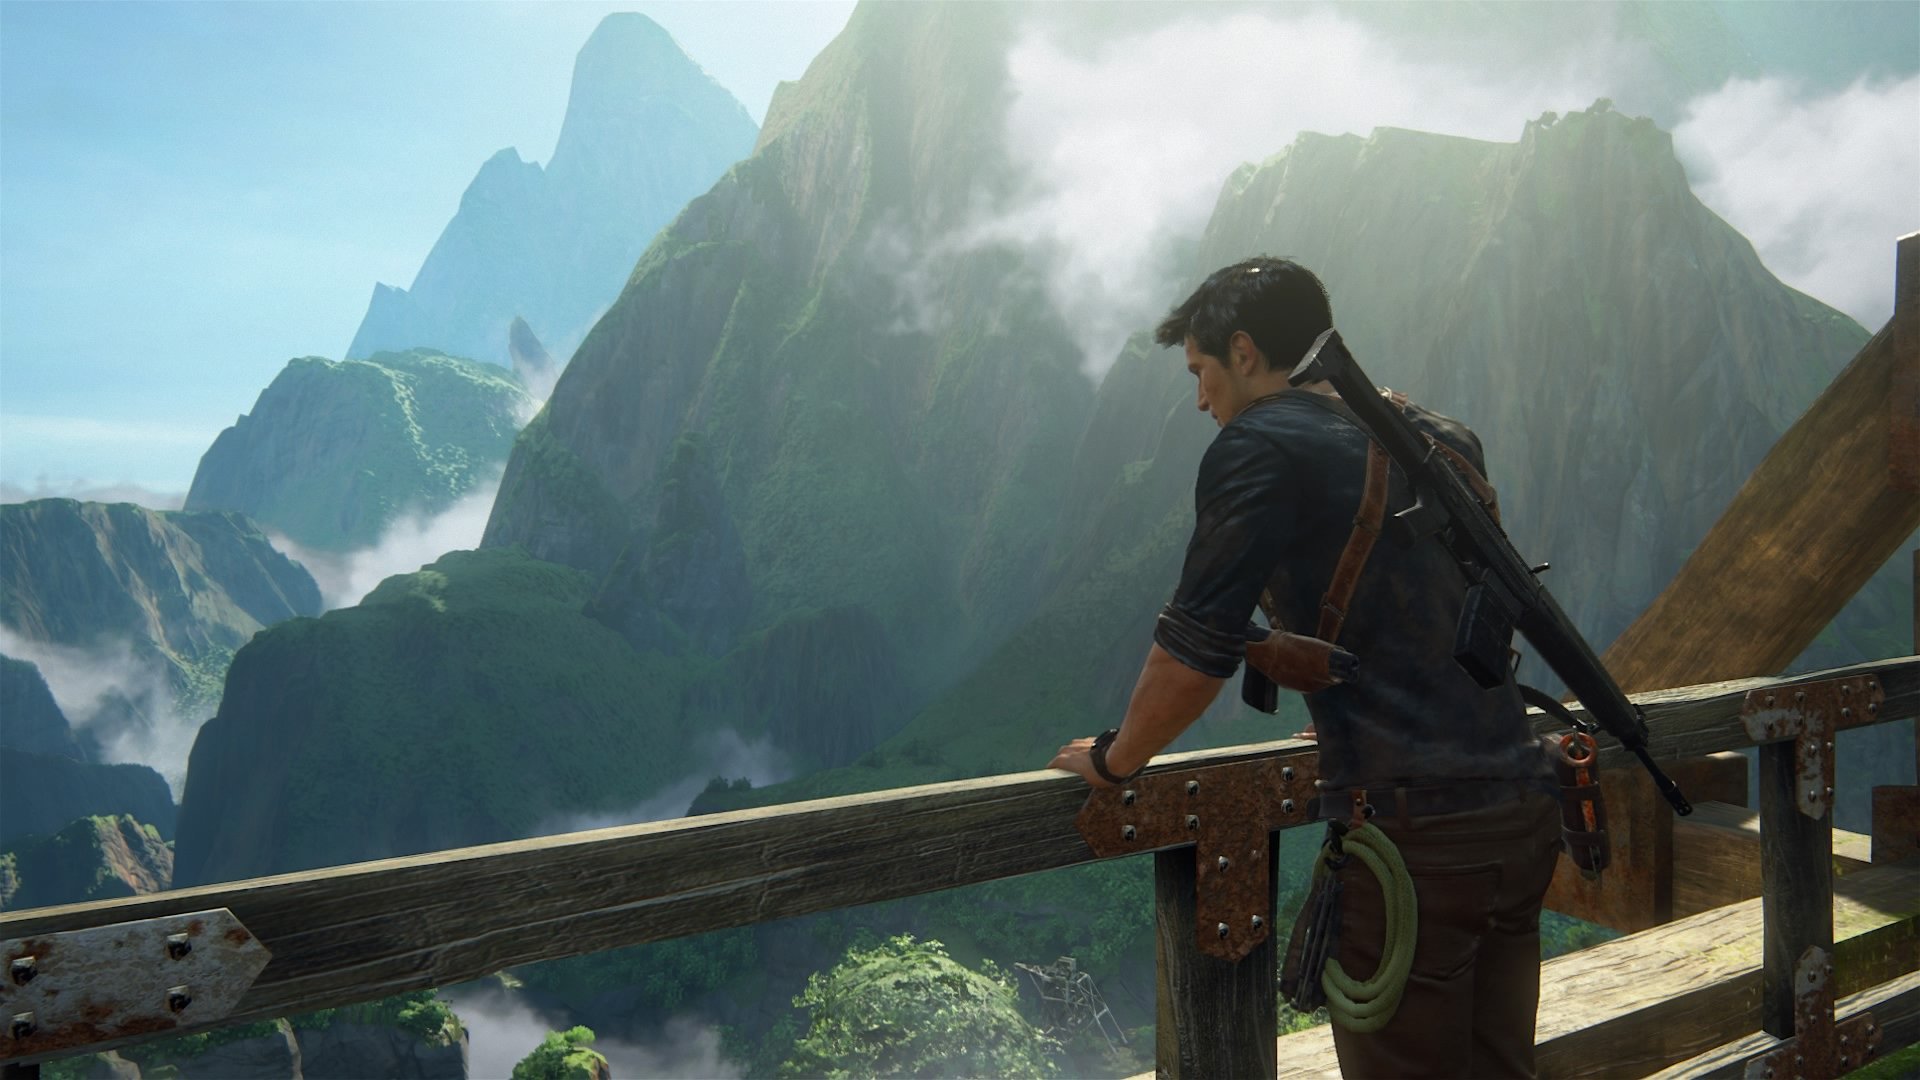 uncharted-4-a-thief-s-end-review-gamespresso